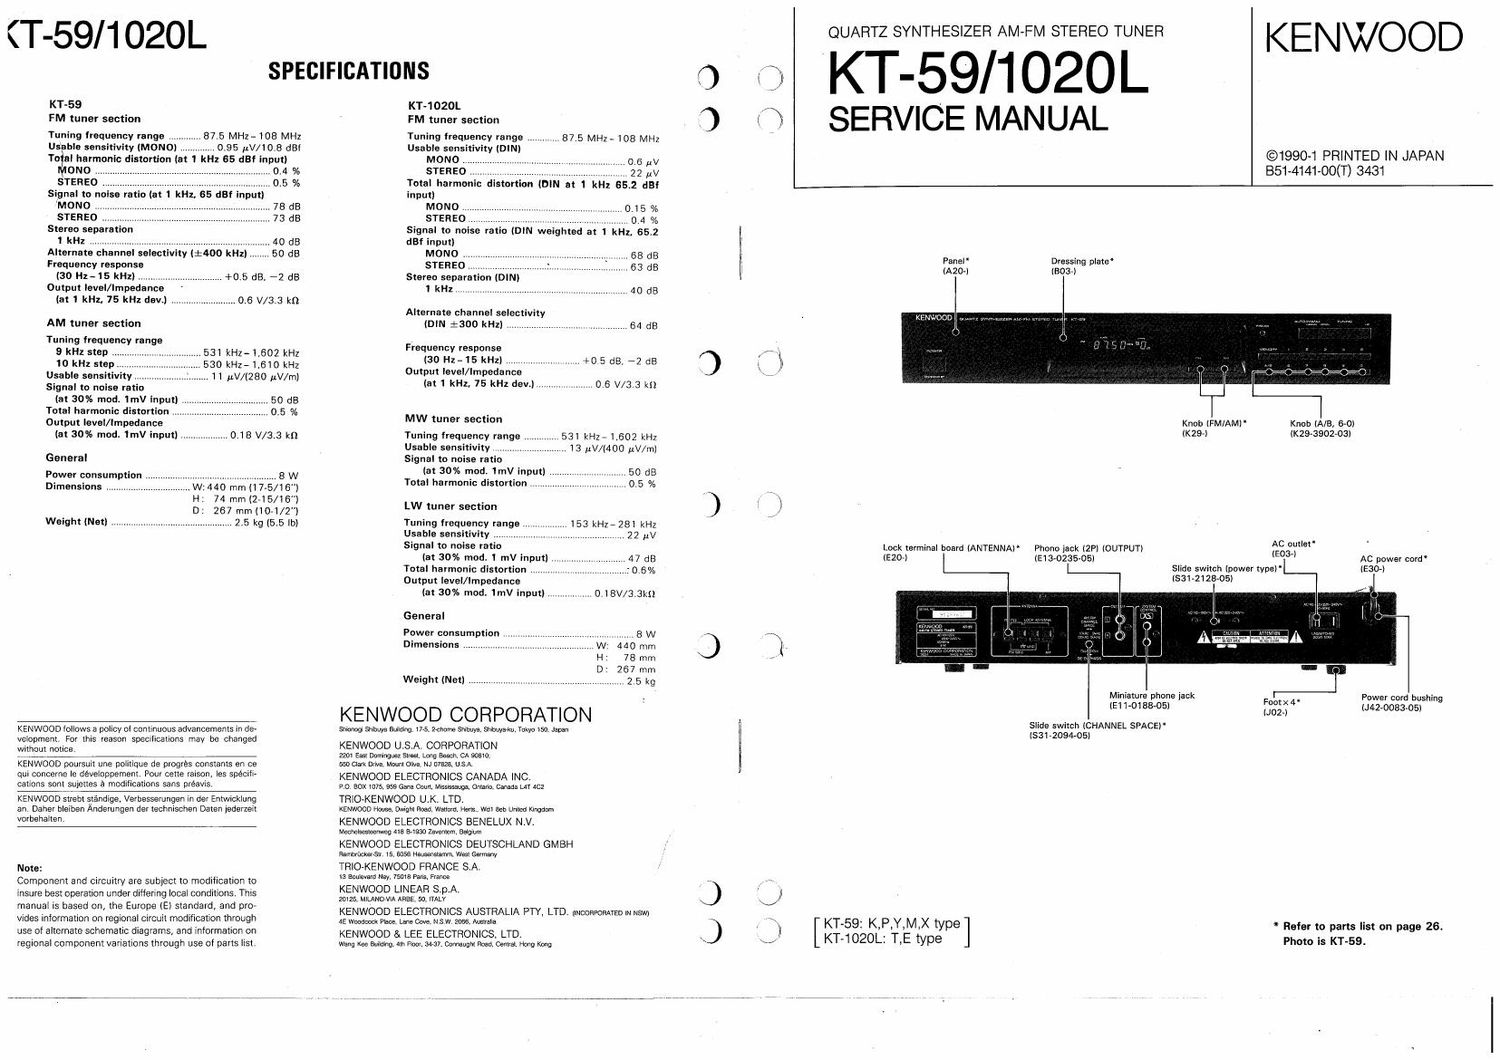 COPY w/ SCHEMATIC VINTAGE AUDIO KENWOOD KT-7001 AM FM STEREO TUNER MANUAL 